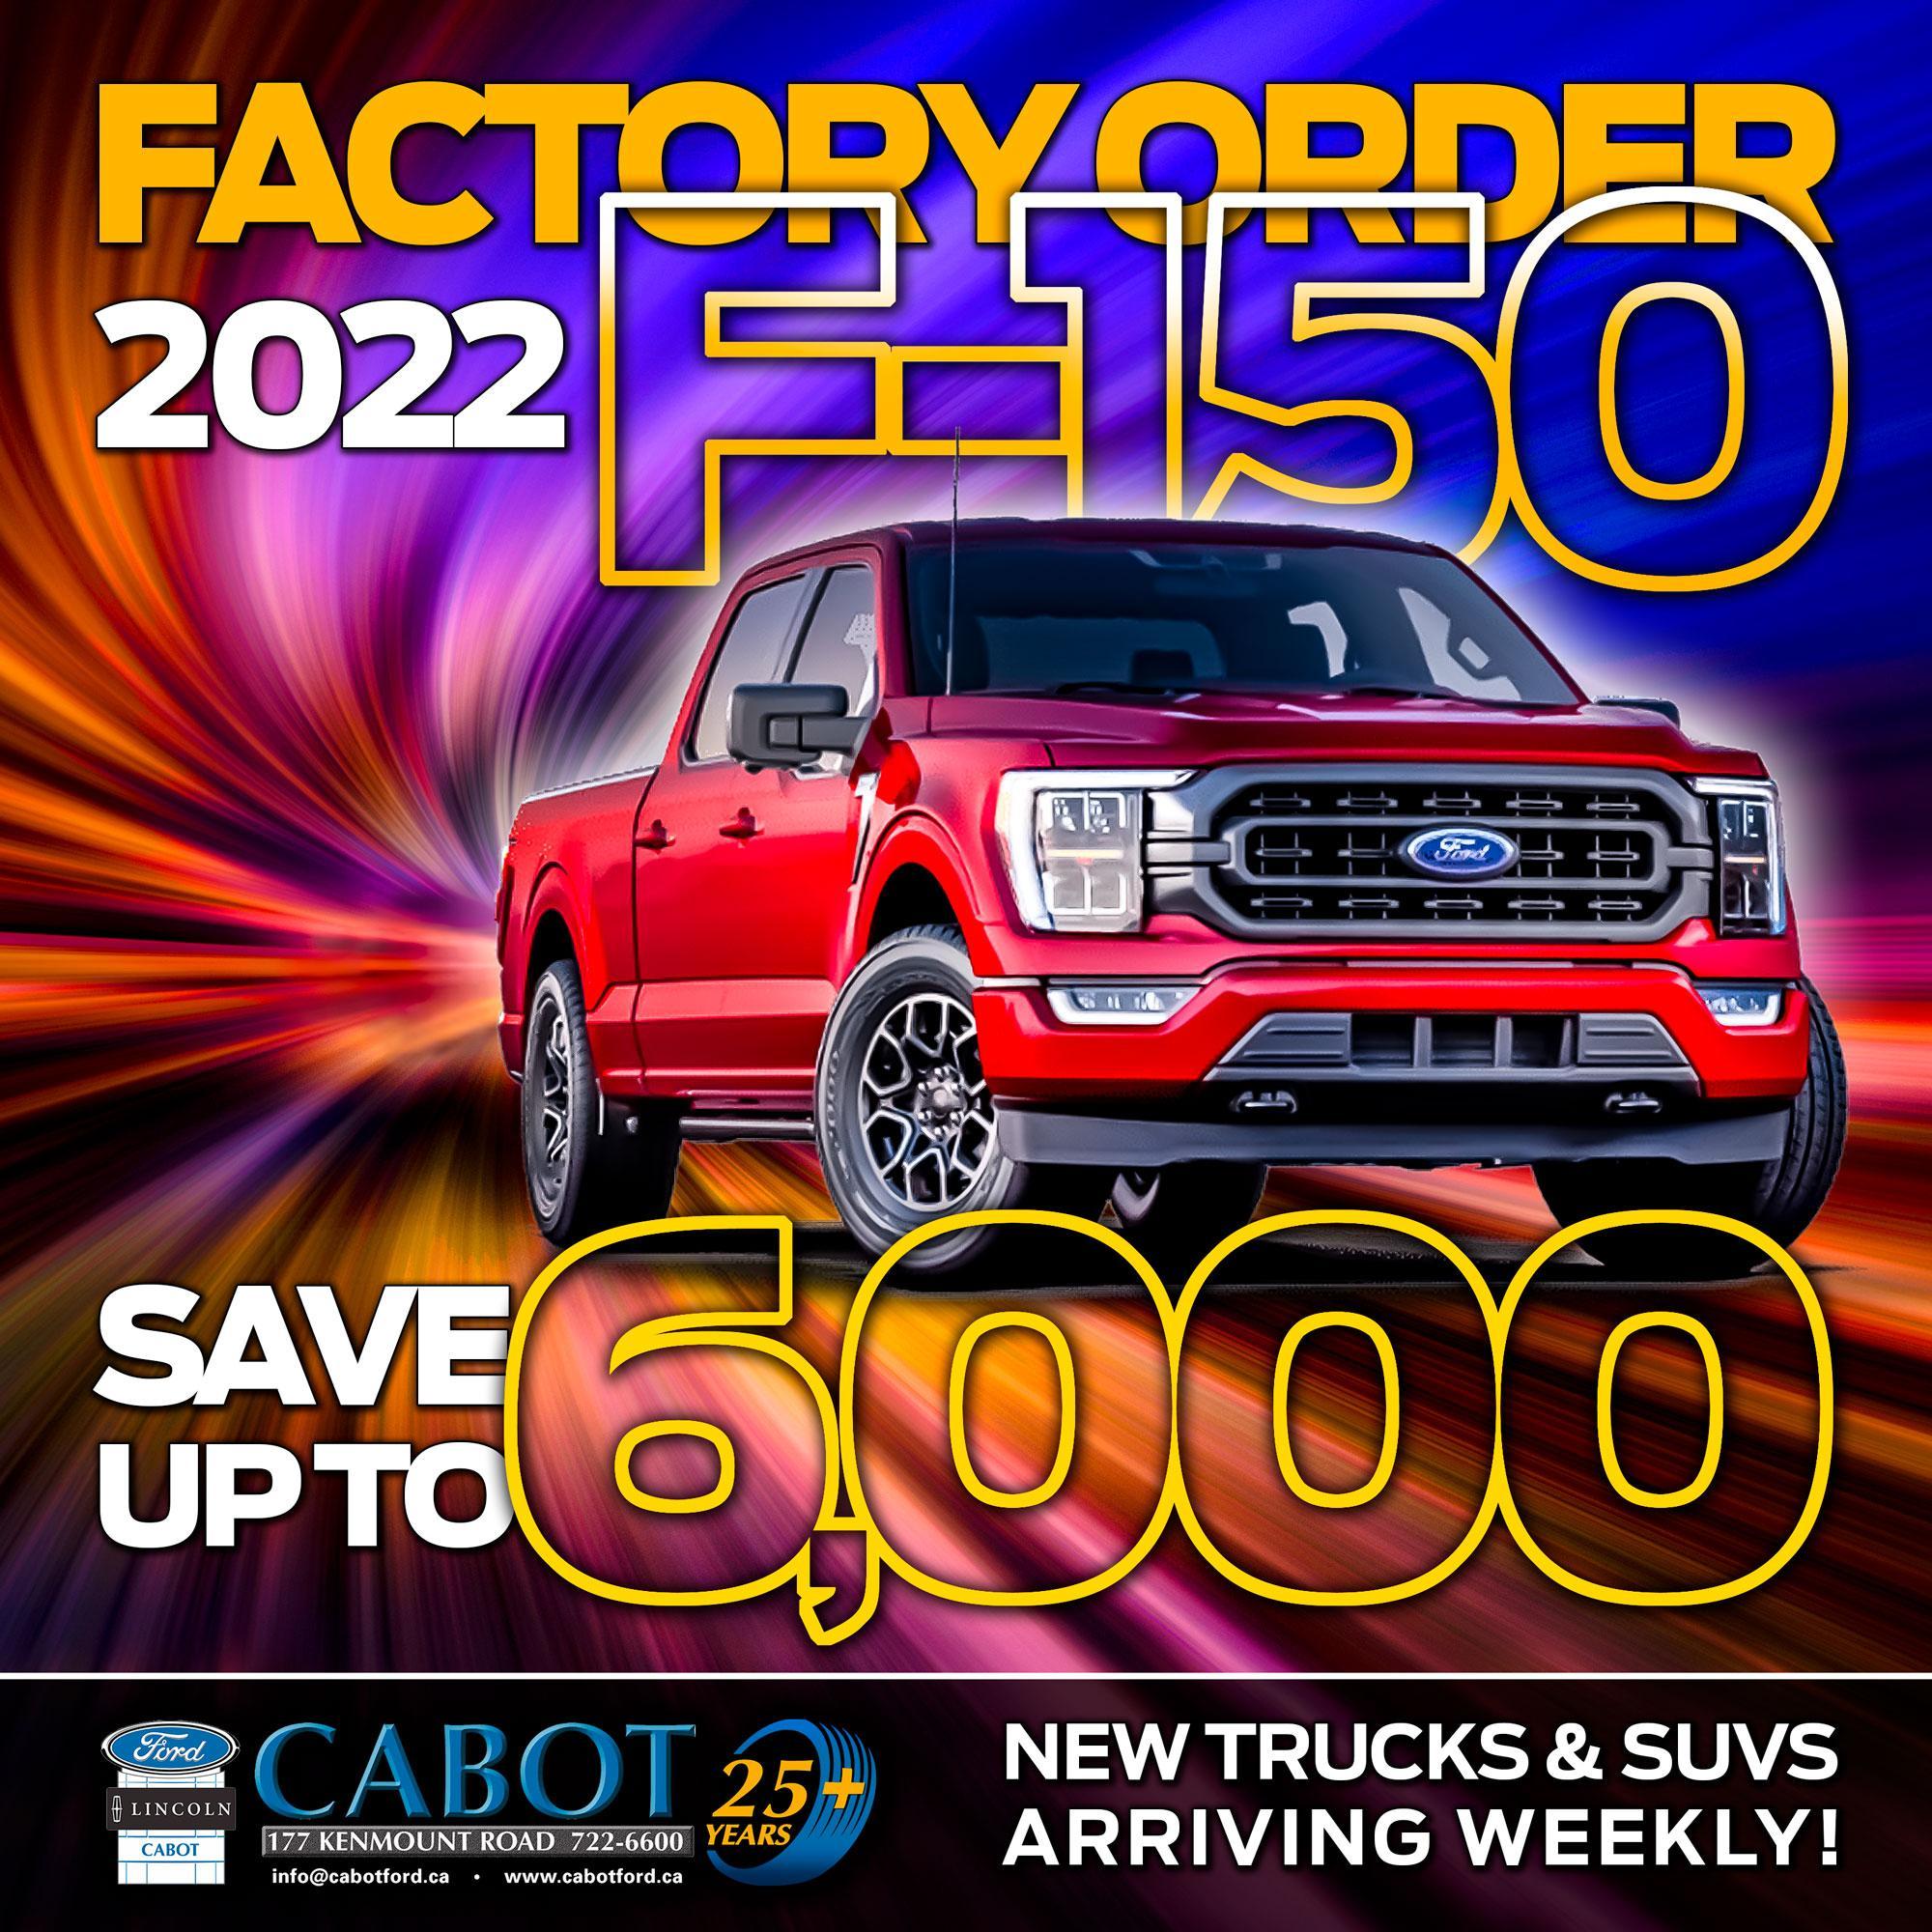 Save up to $6,000 on a factory order 2022 F-150!